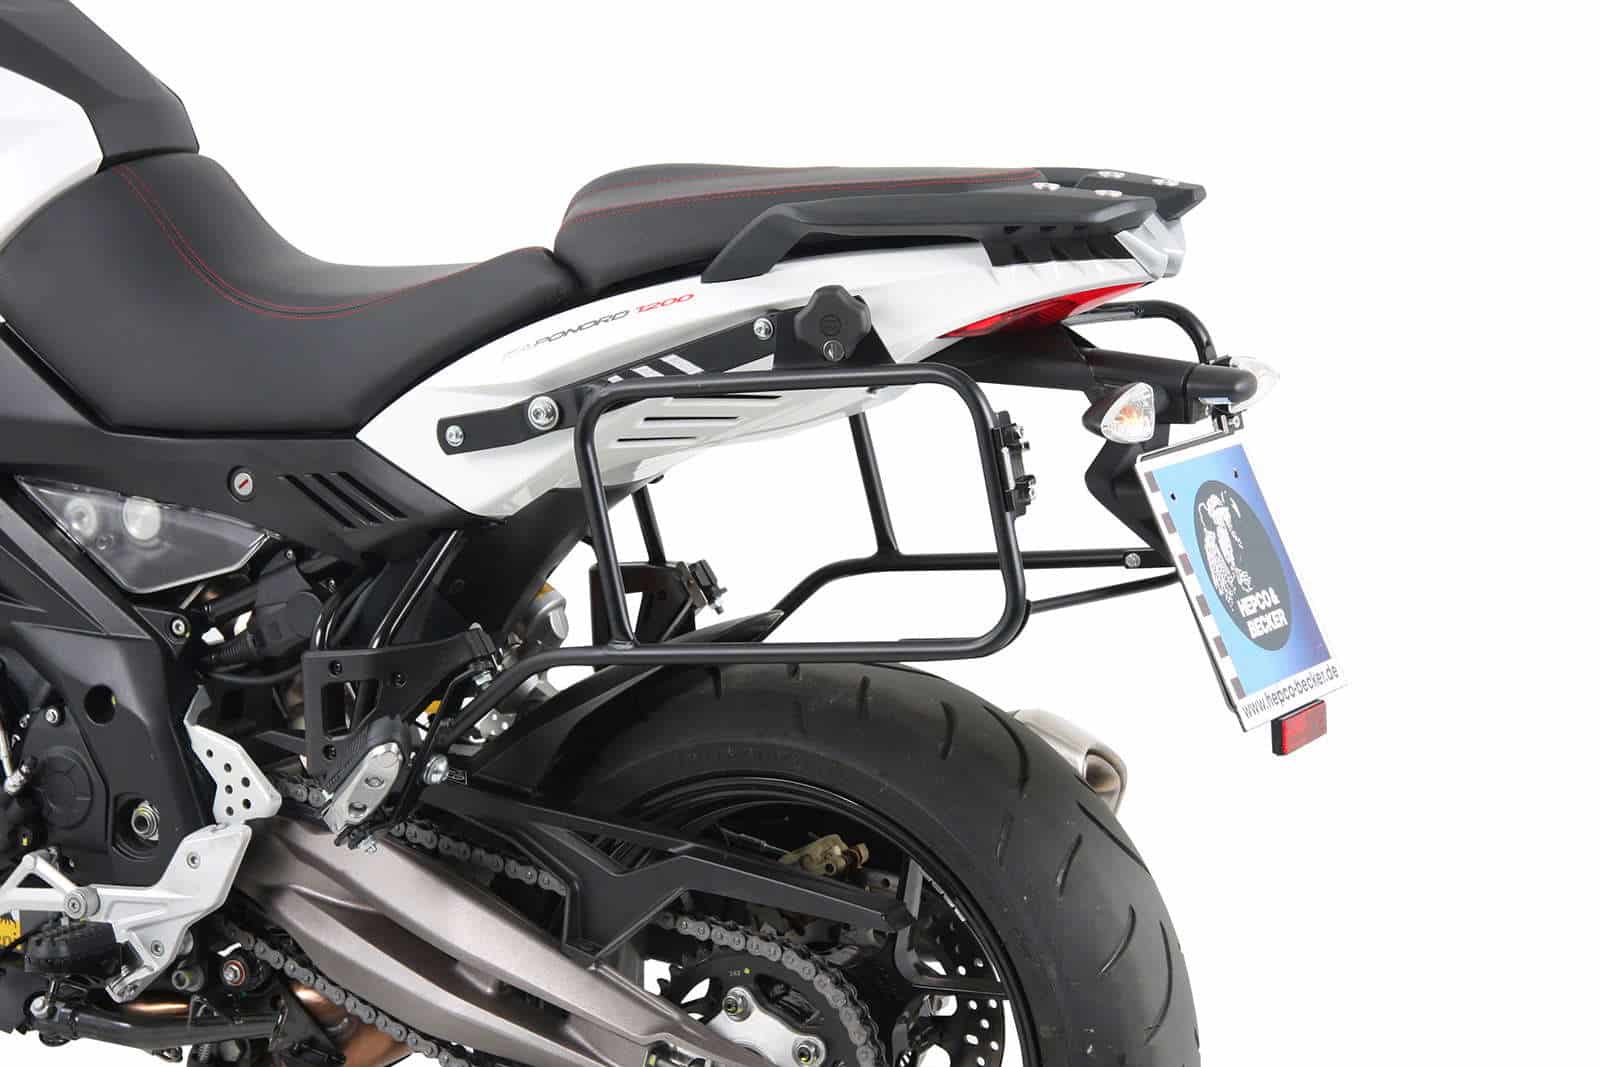 Sidecarrier Lock-it black for Aprilia Caponord 1200 (2013-2016)